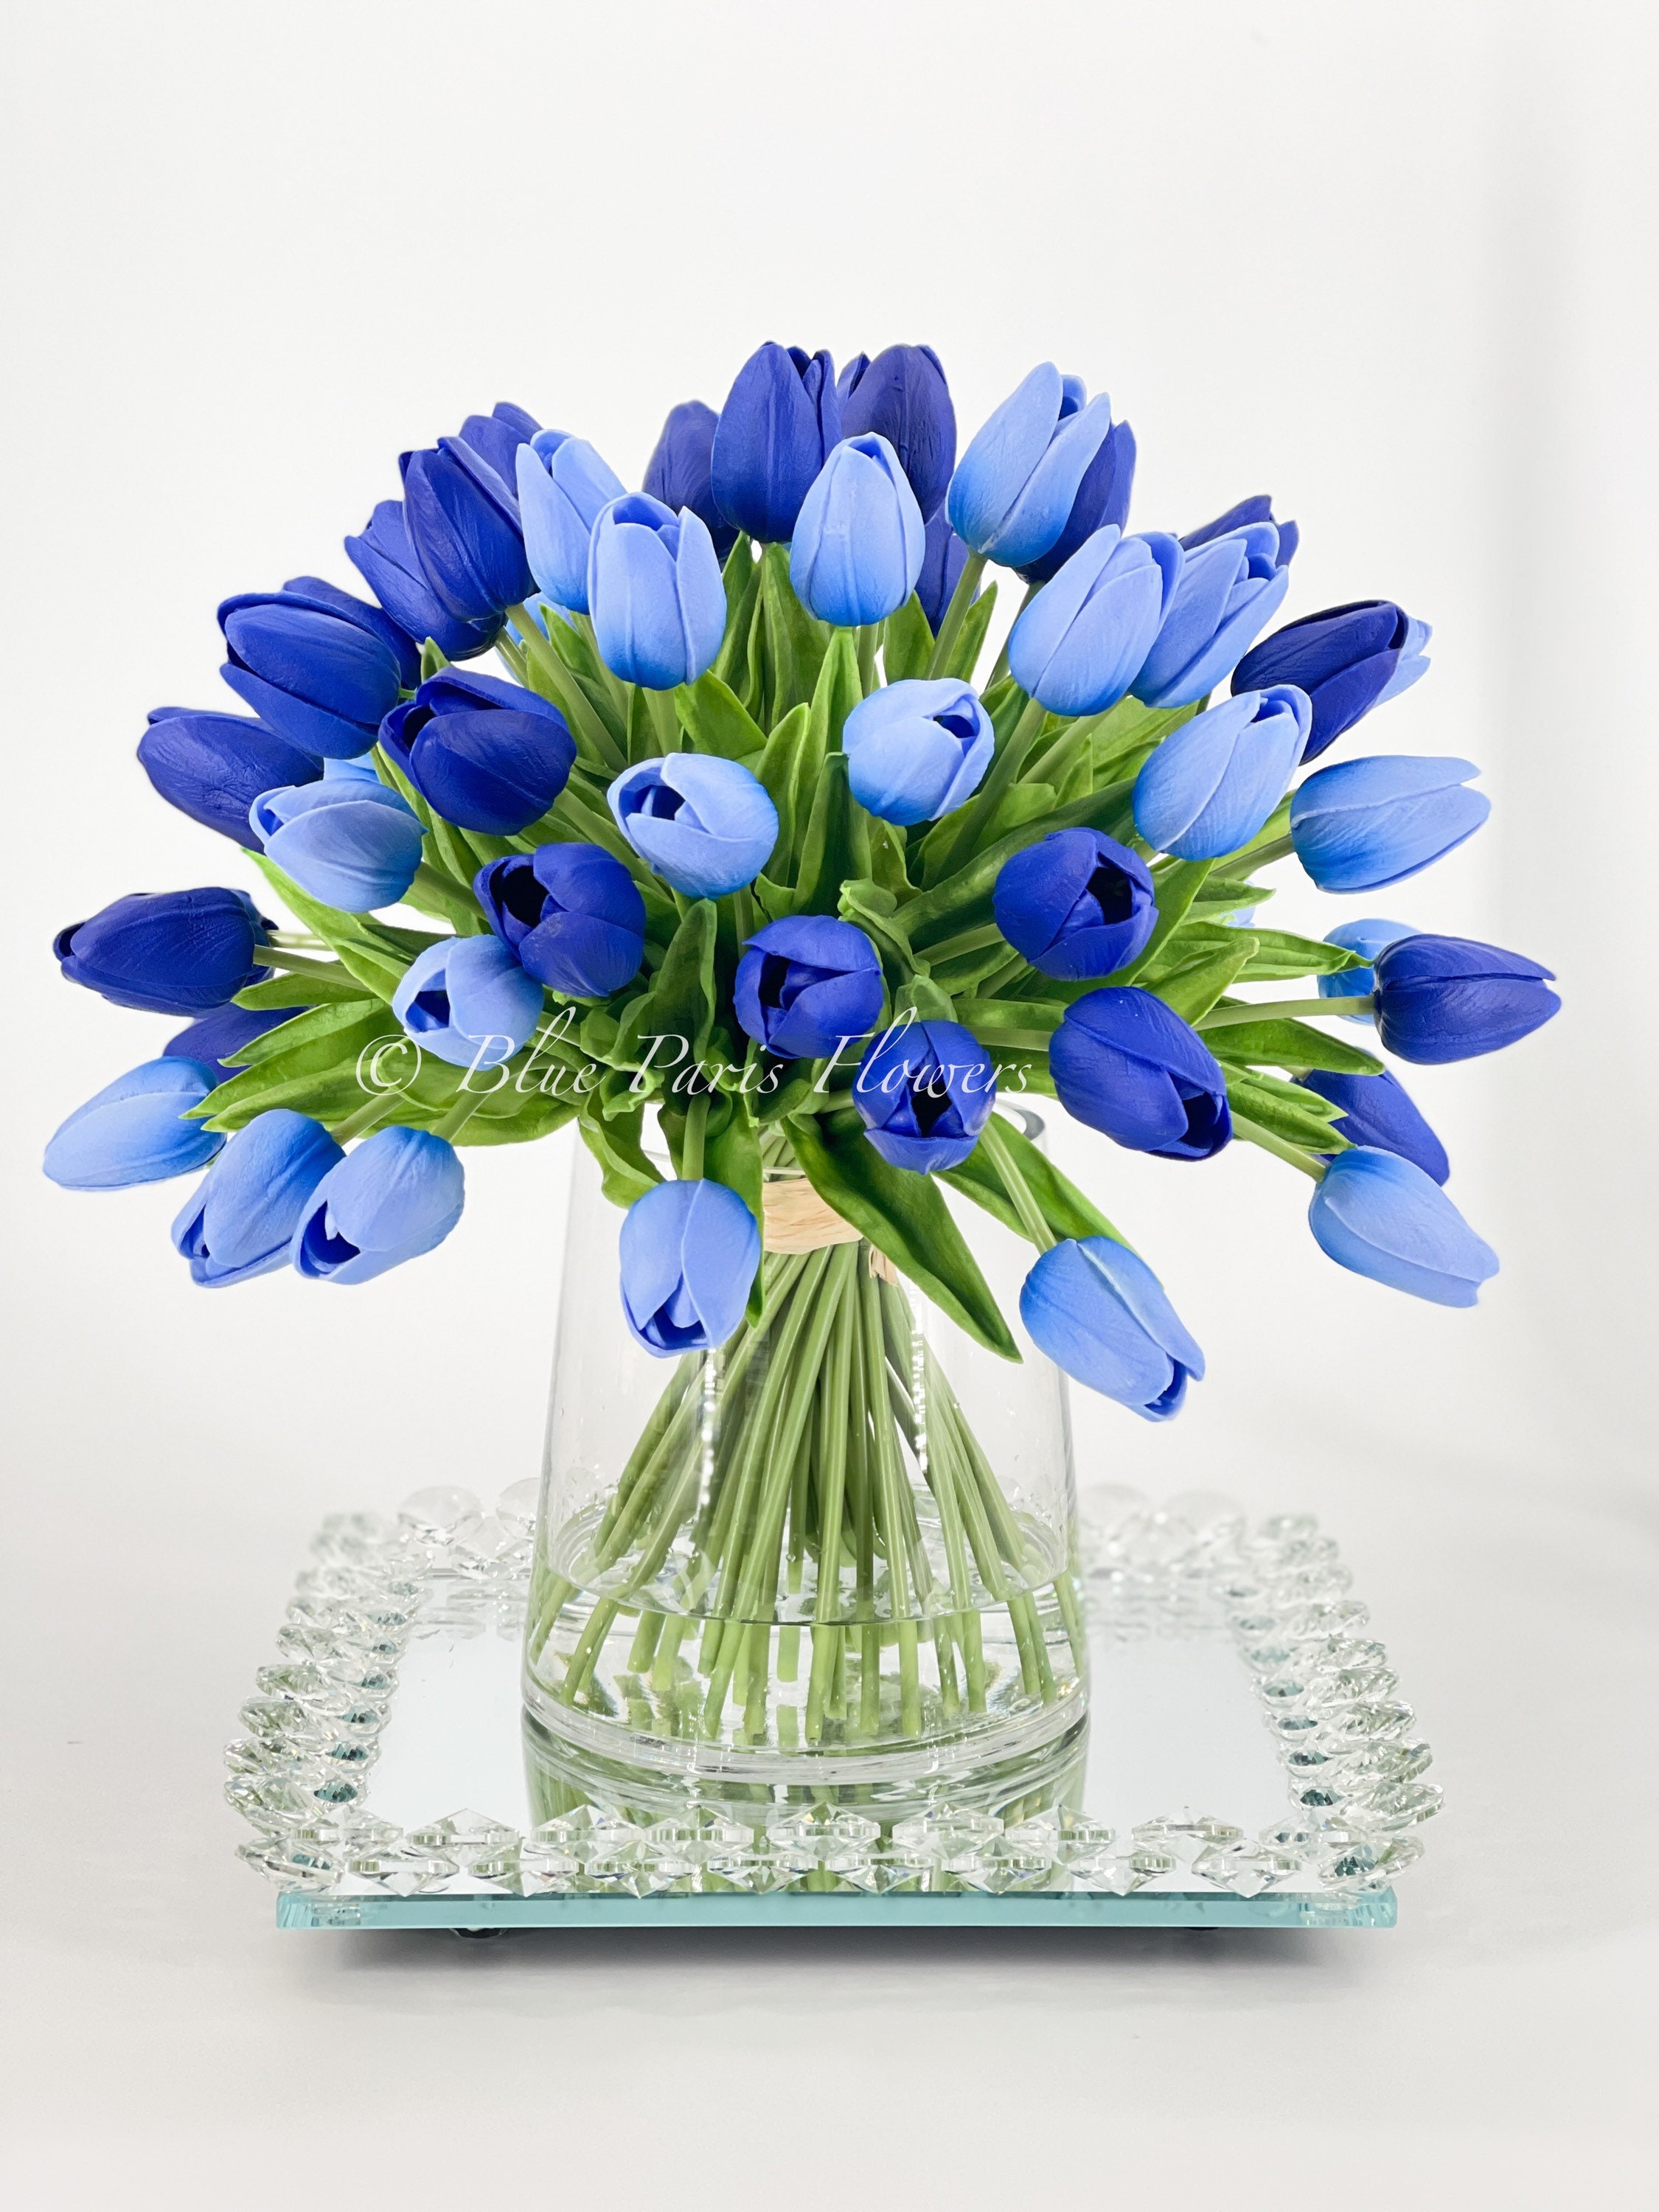 Buy X-large 50 Tulips French Floral Arrangement in Vase Modern Online in  India 